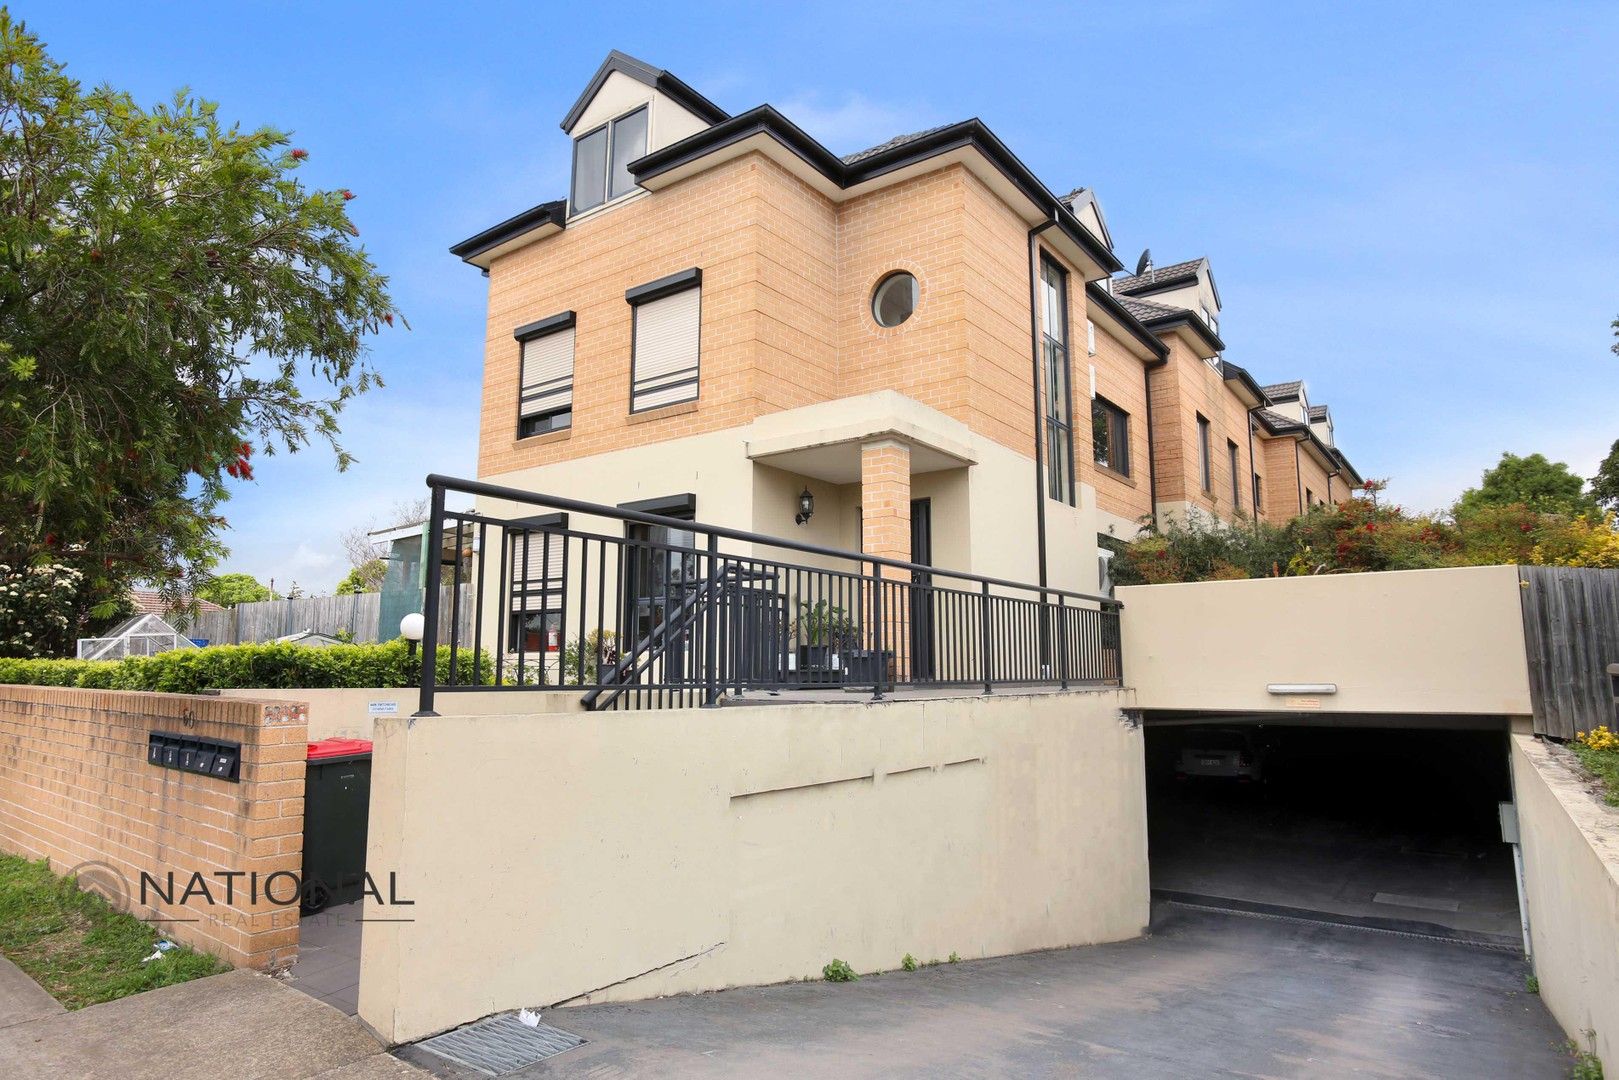 3/60 Station St, Guildford NSW 2161, Image 0